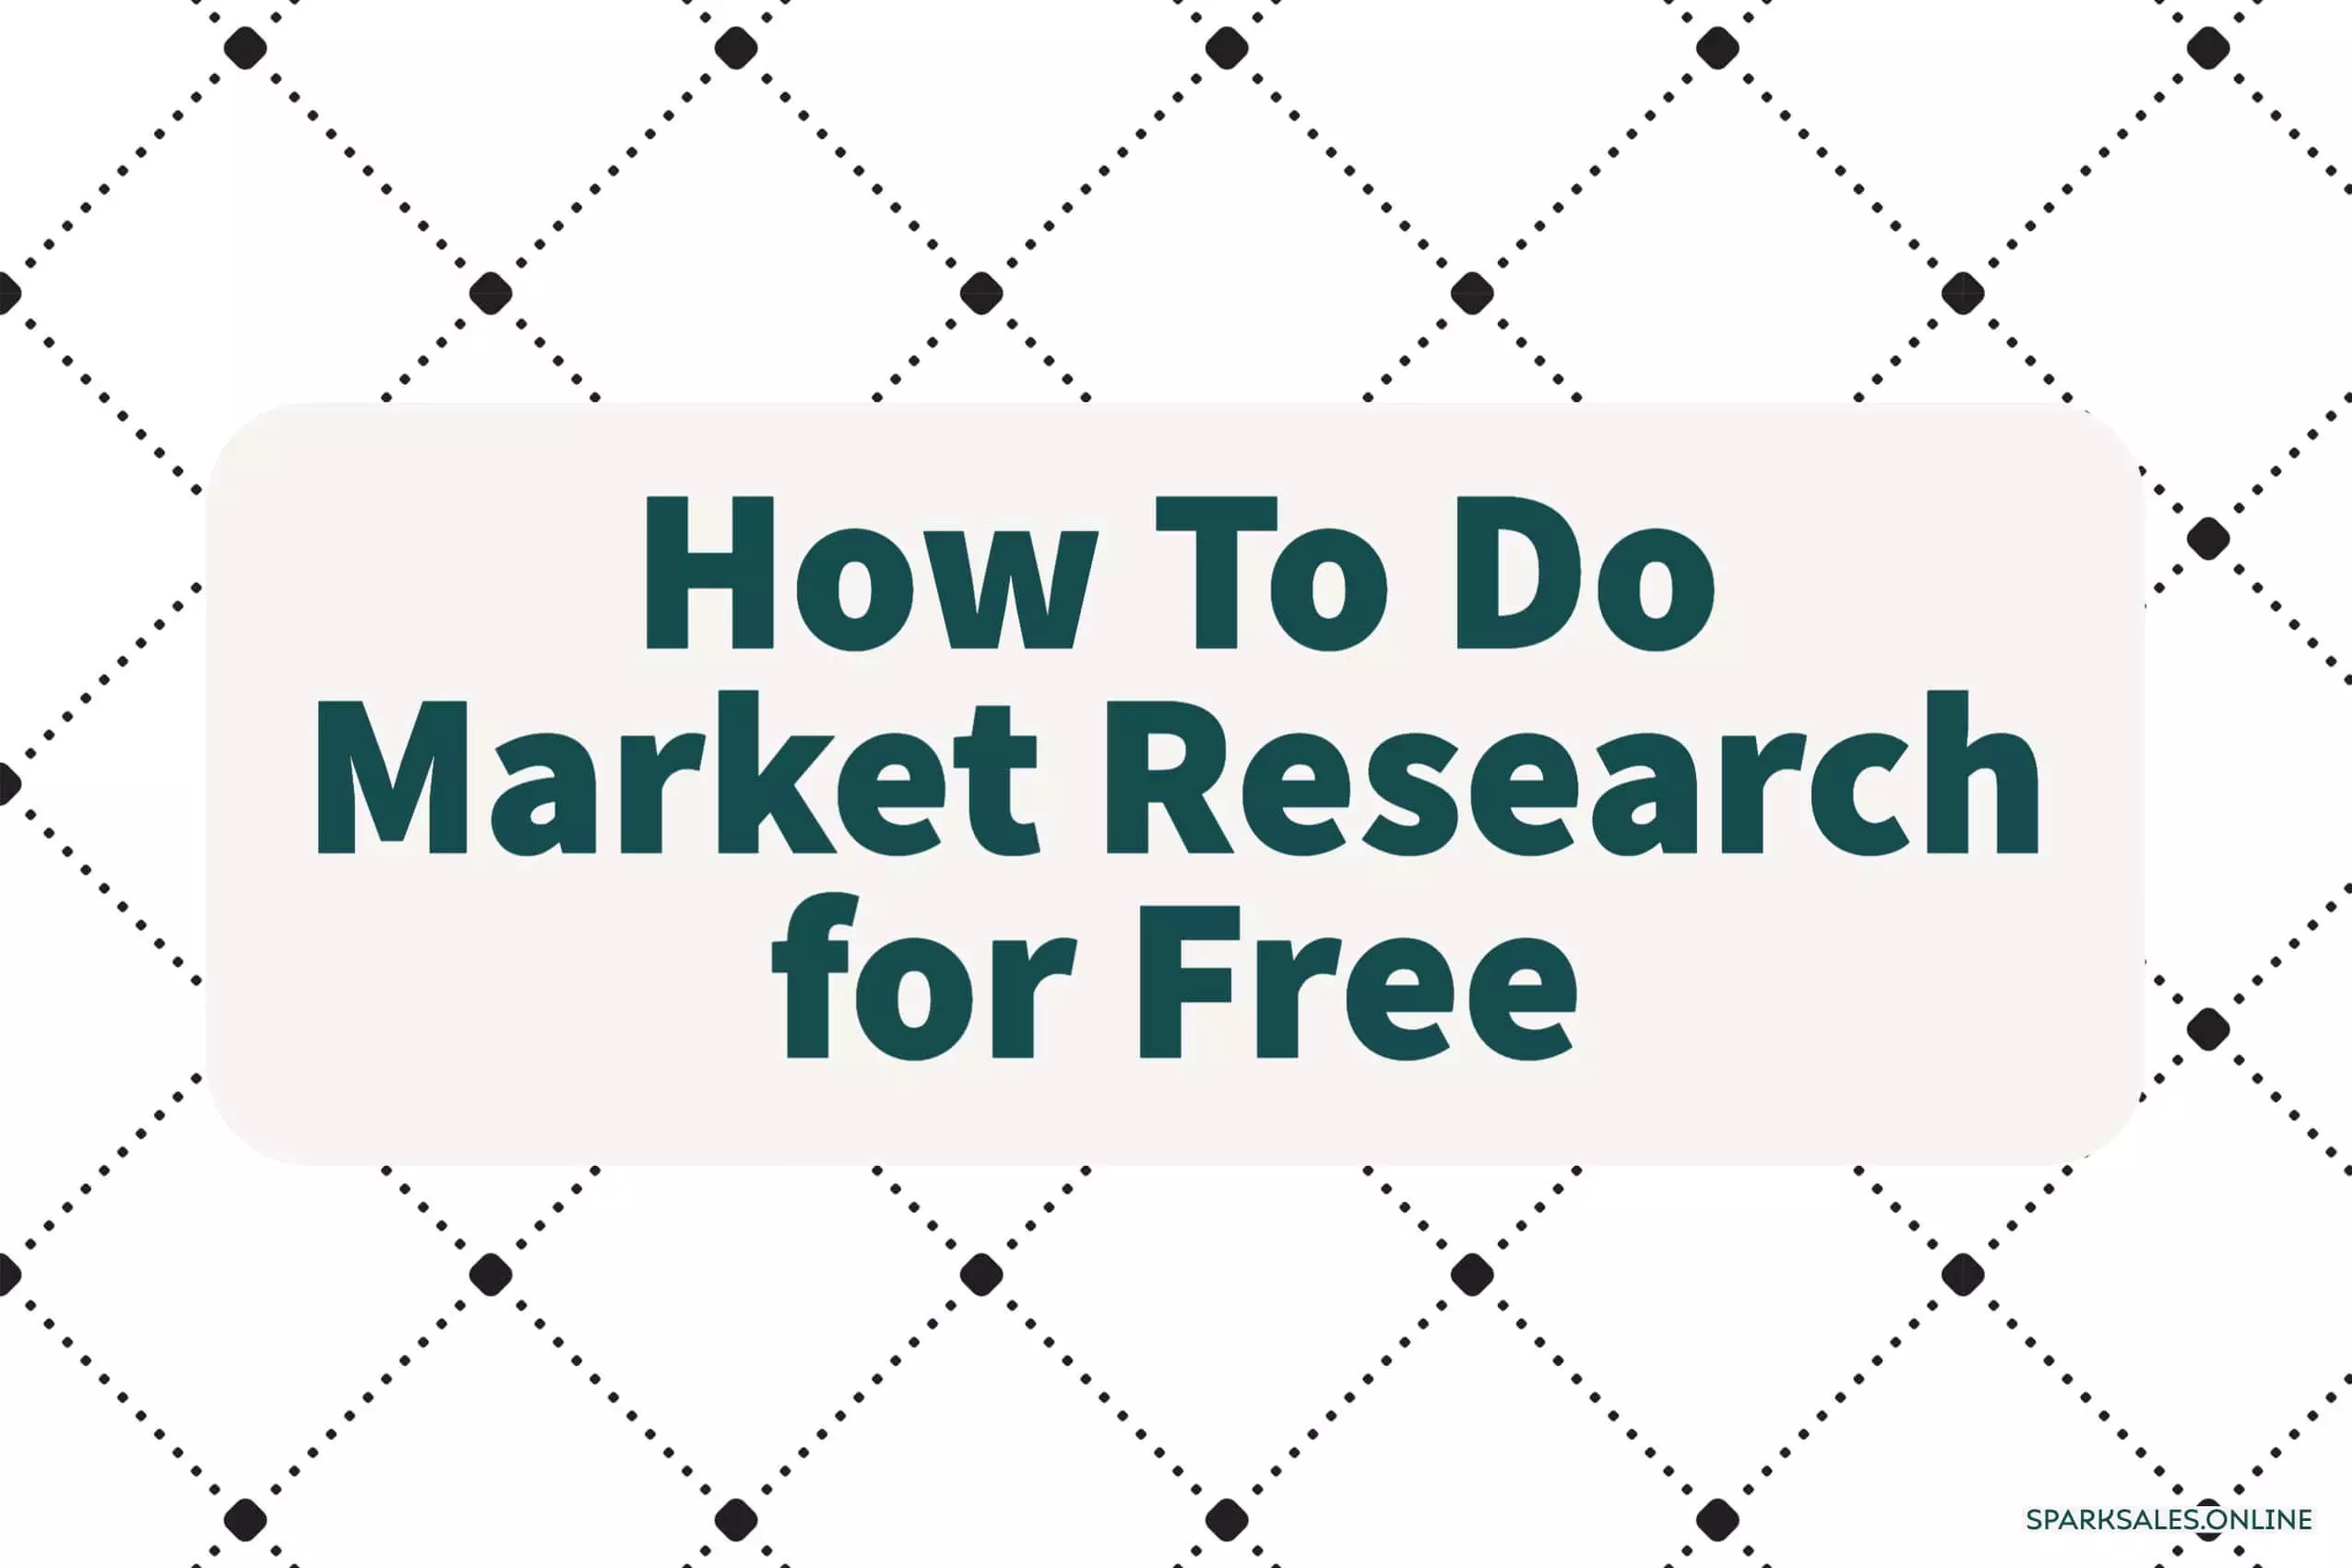 How to do market research for free